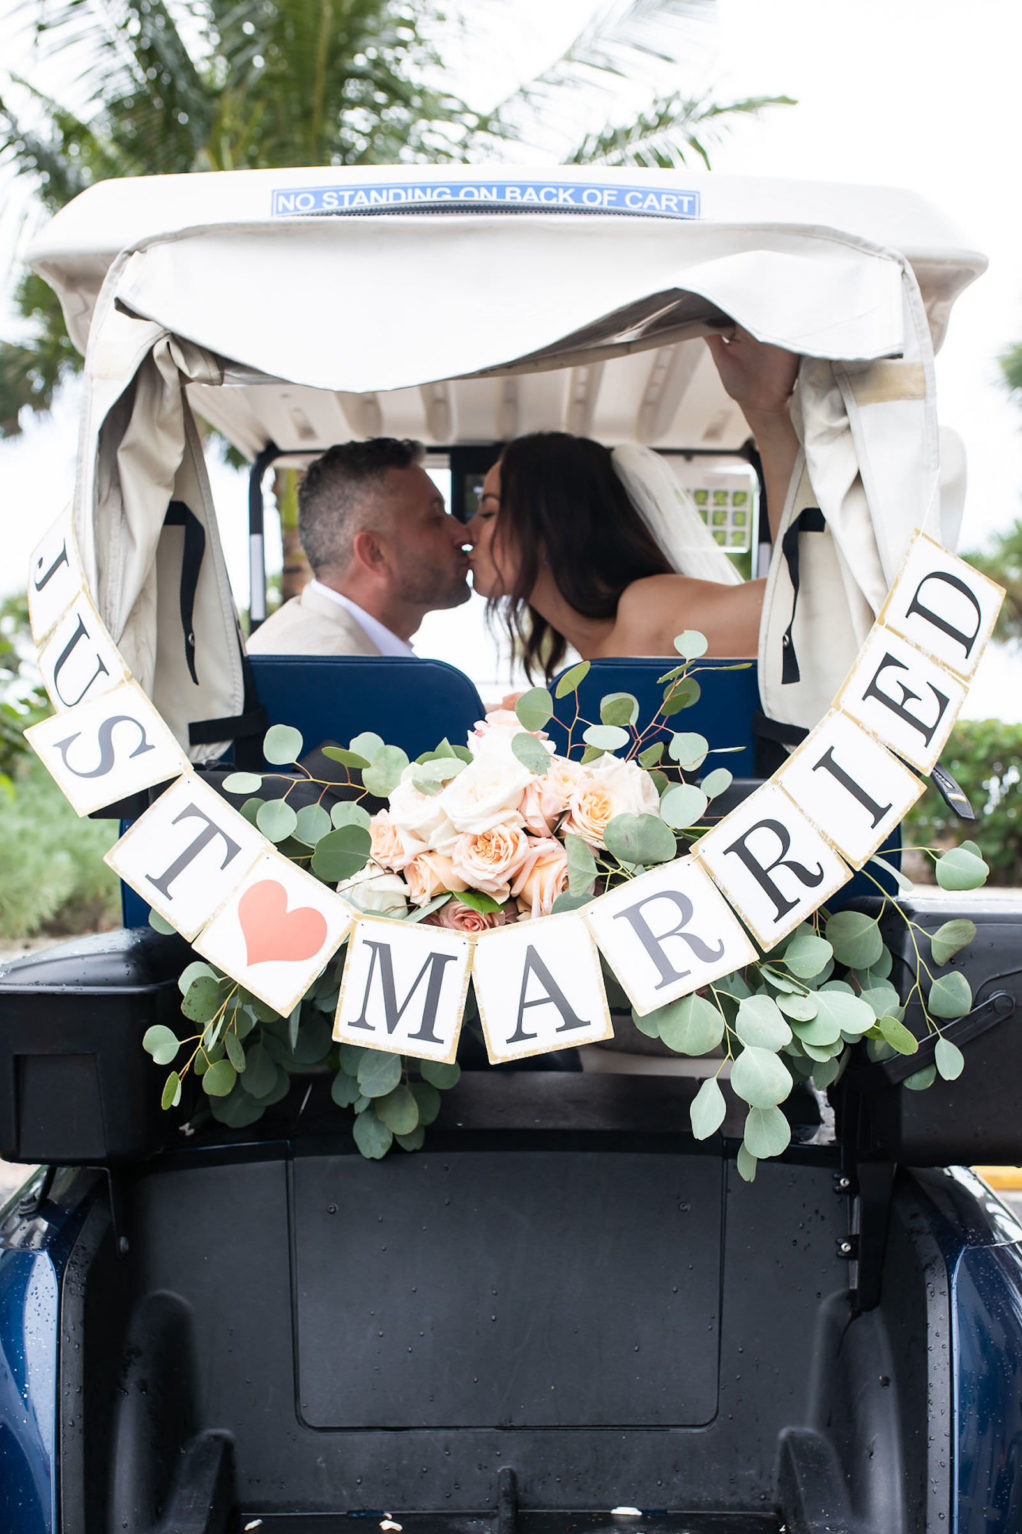 Bride and Groom Getaway Send off Classic Car Portrait Photo with Just Married Sign and Bumper Floral Arrangement with Peach Roses and Eucalyptus Greenery